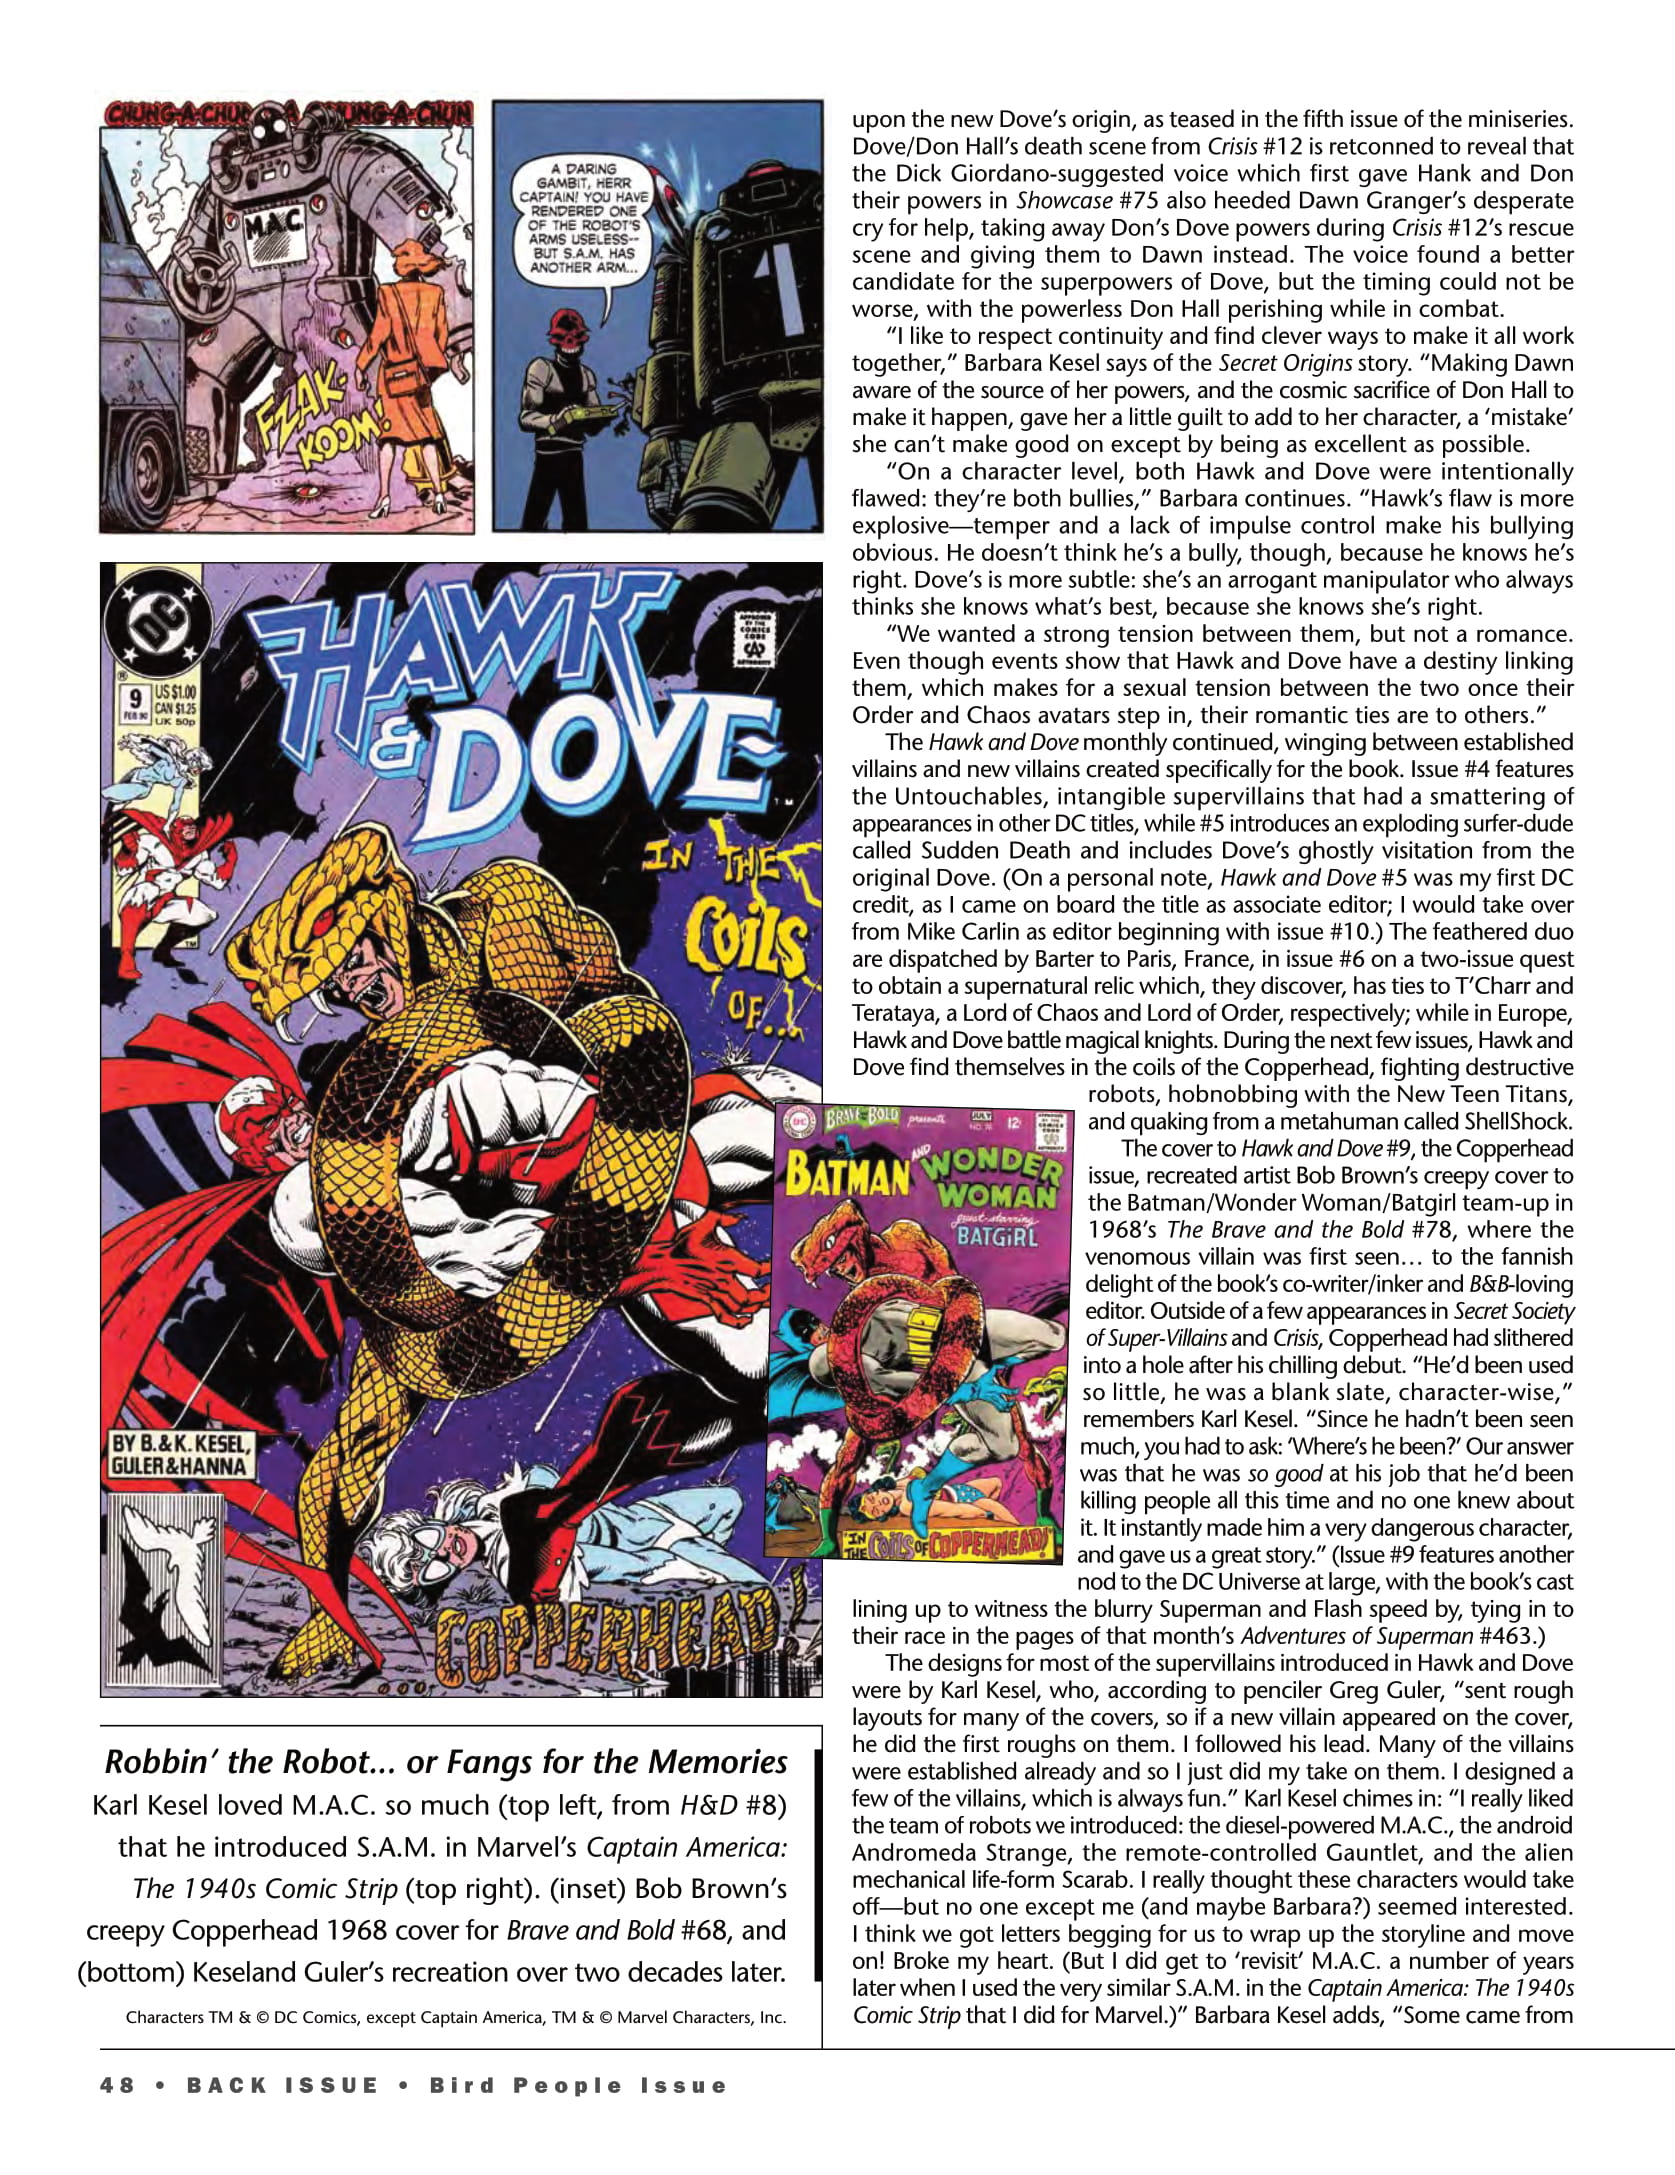 Read online Back Issue comic -  Issue #97 - 50